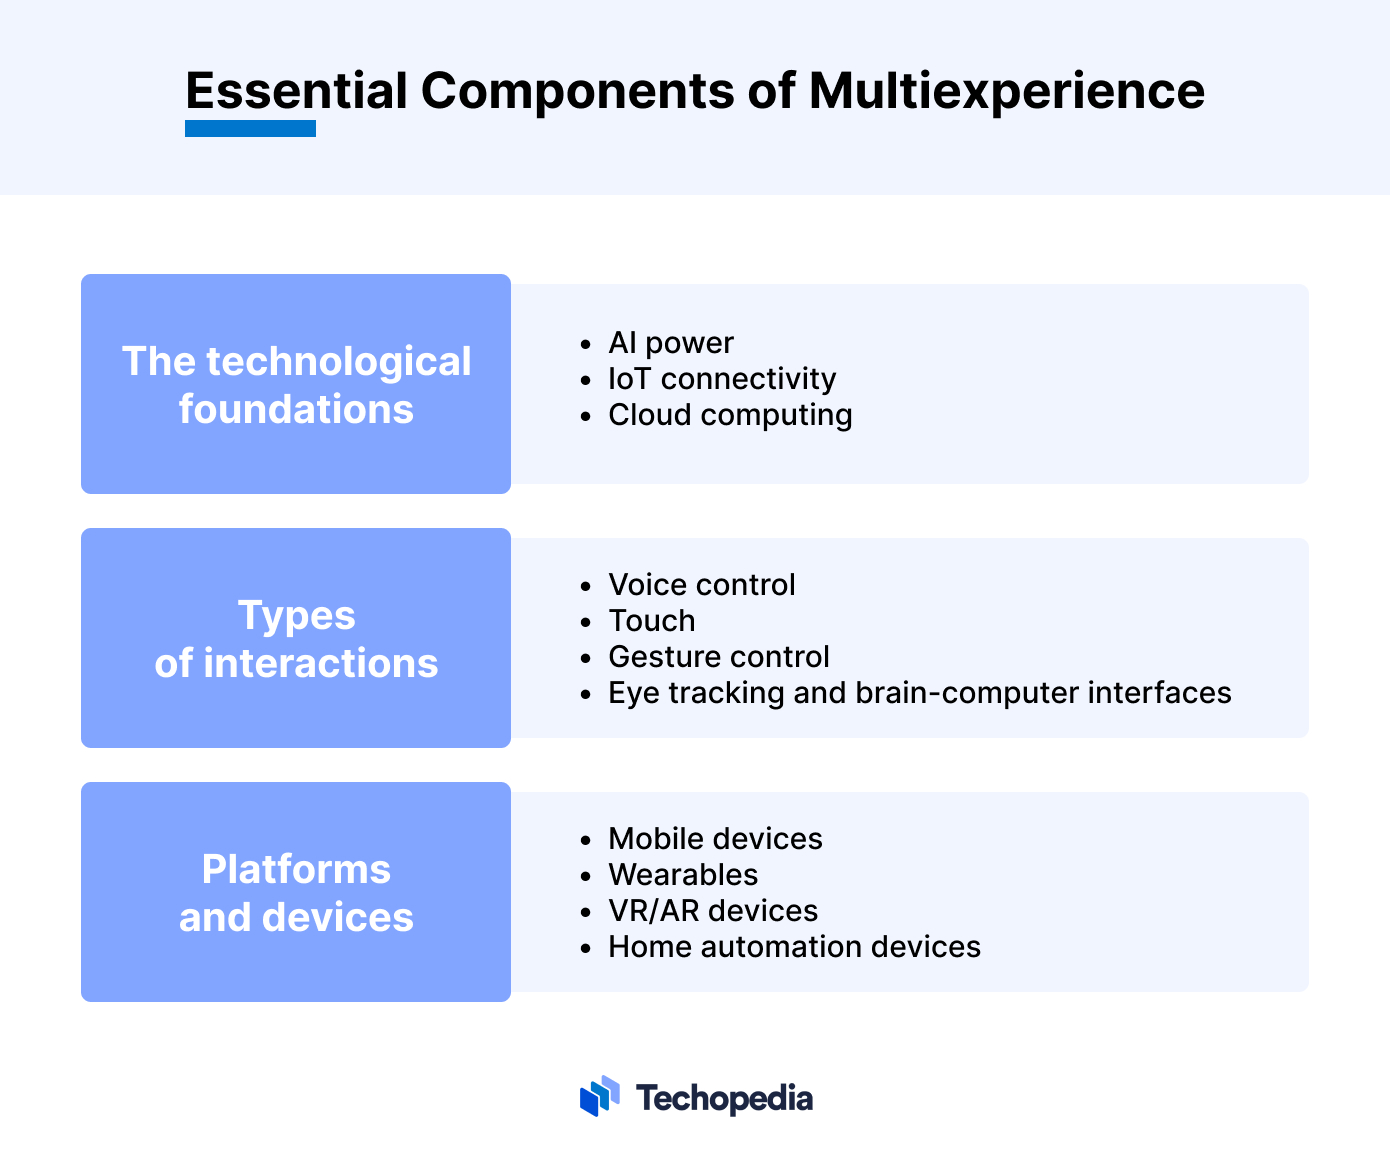 Essential Components of Multiexperience